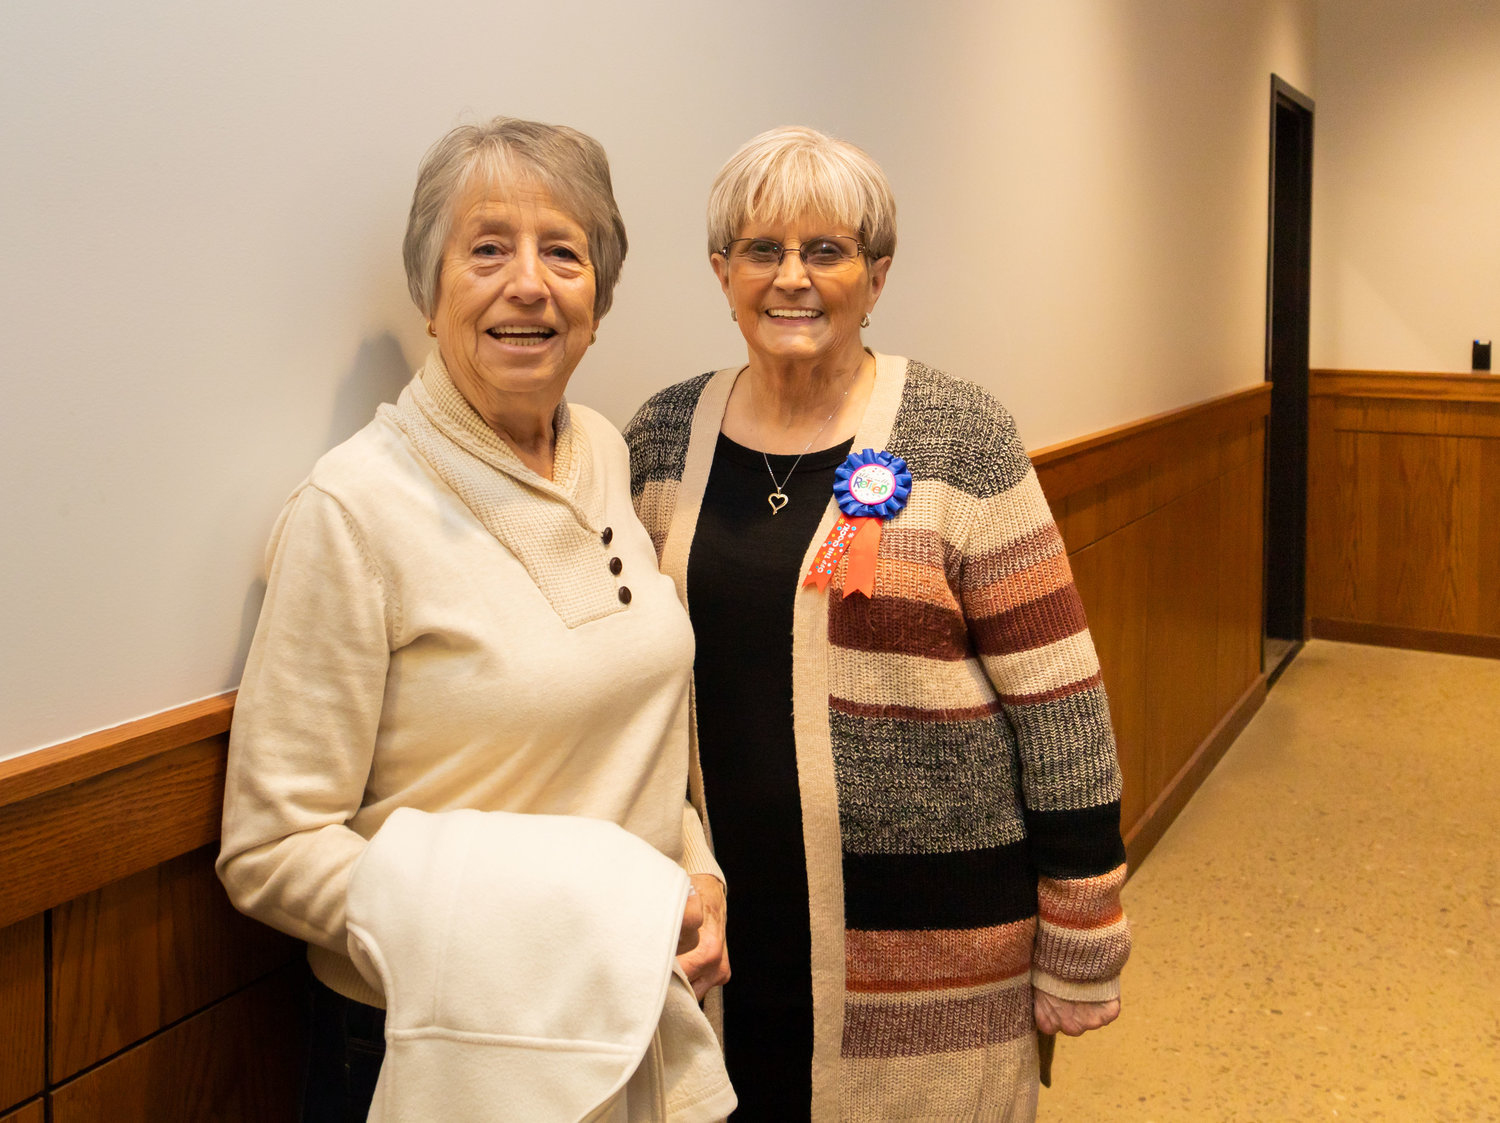 Neta Crutchfield and her friend and former colleague Shiela Miller are now both retired. Miller left the position of Randolph County Collector after 24 years.